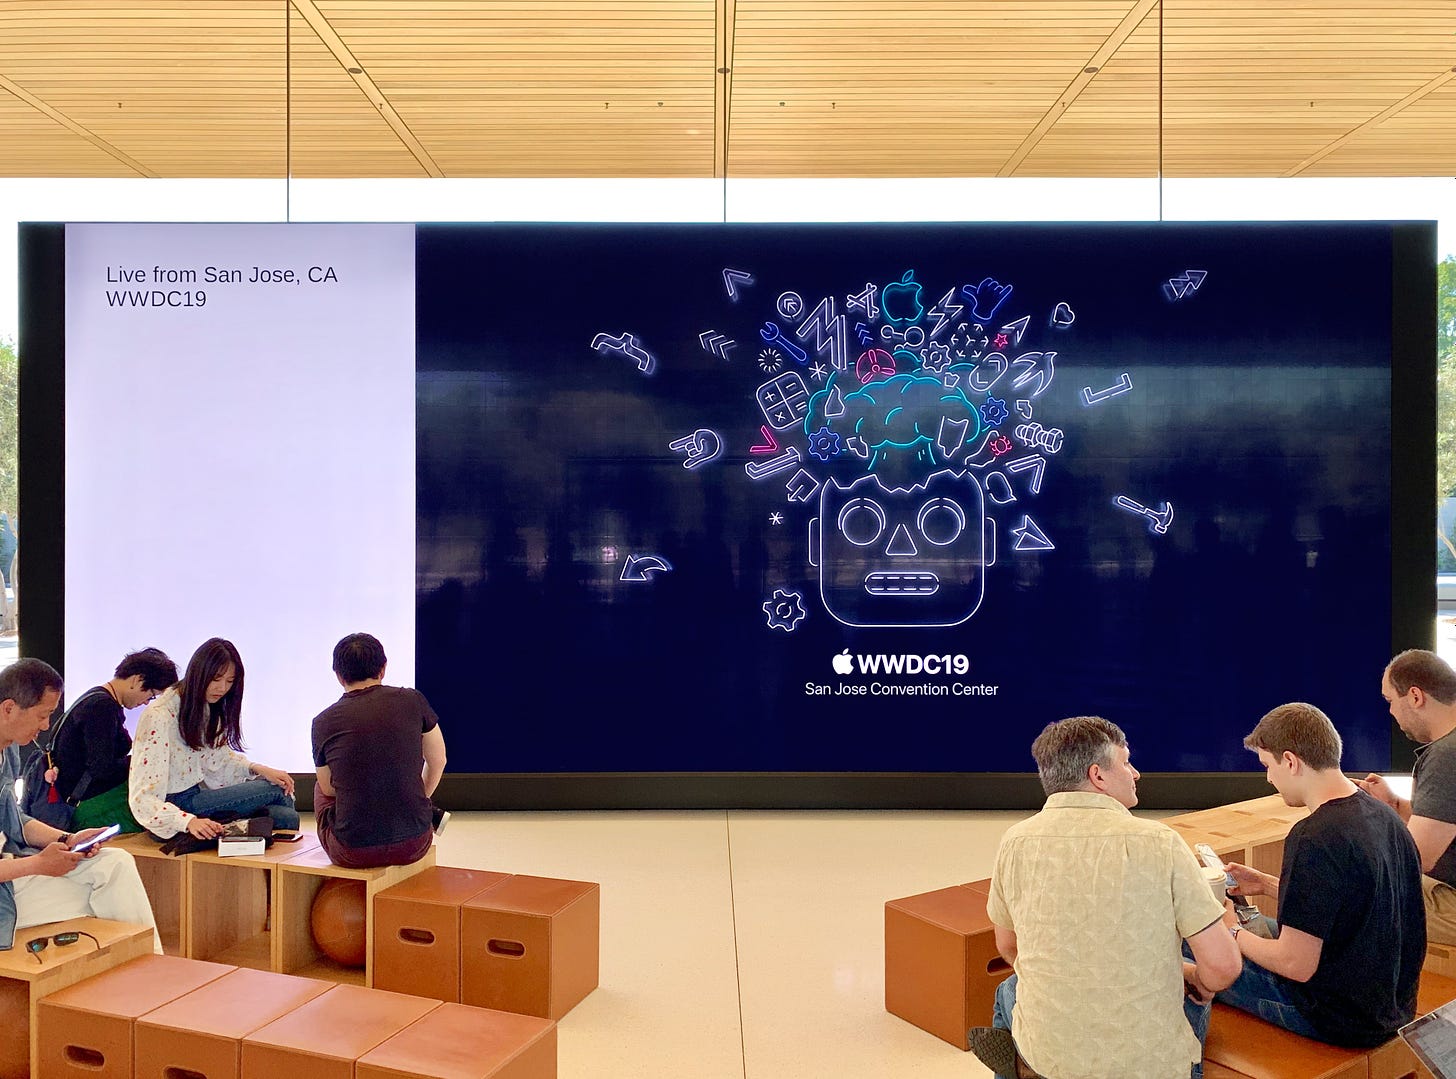 The Forum at Apple Park Visitor Center. On the video wall is artwork for WWDC 2019. People are sitting on Forum seats in front of the video wall, waiting for a livestream to begin.